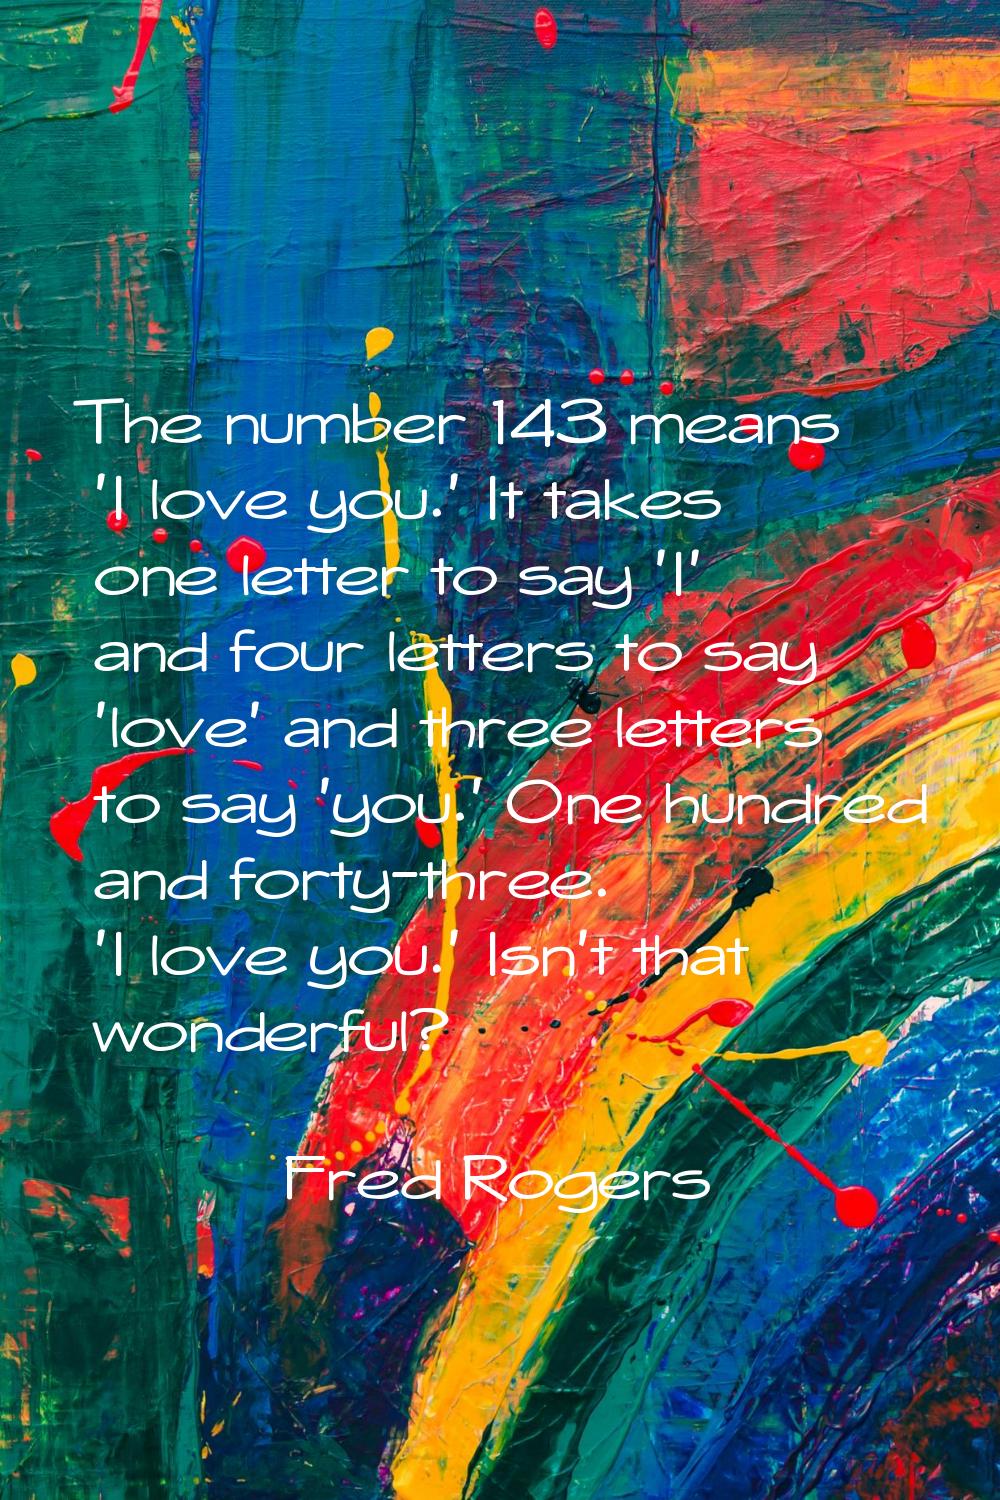 The number 143 means 'I love you.' It takes one letter to say 'I' and four letters to say 'love' an